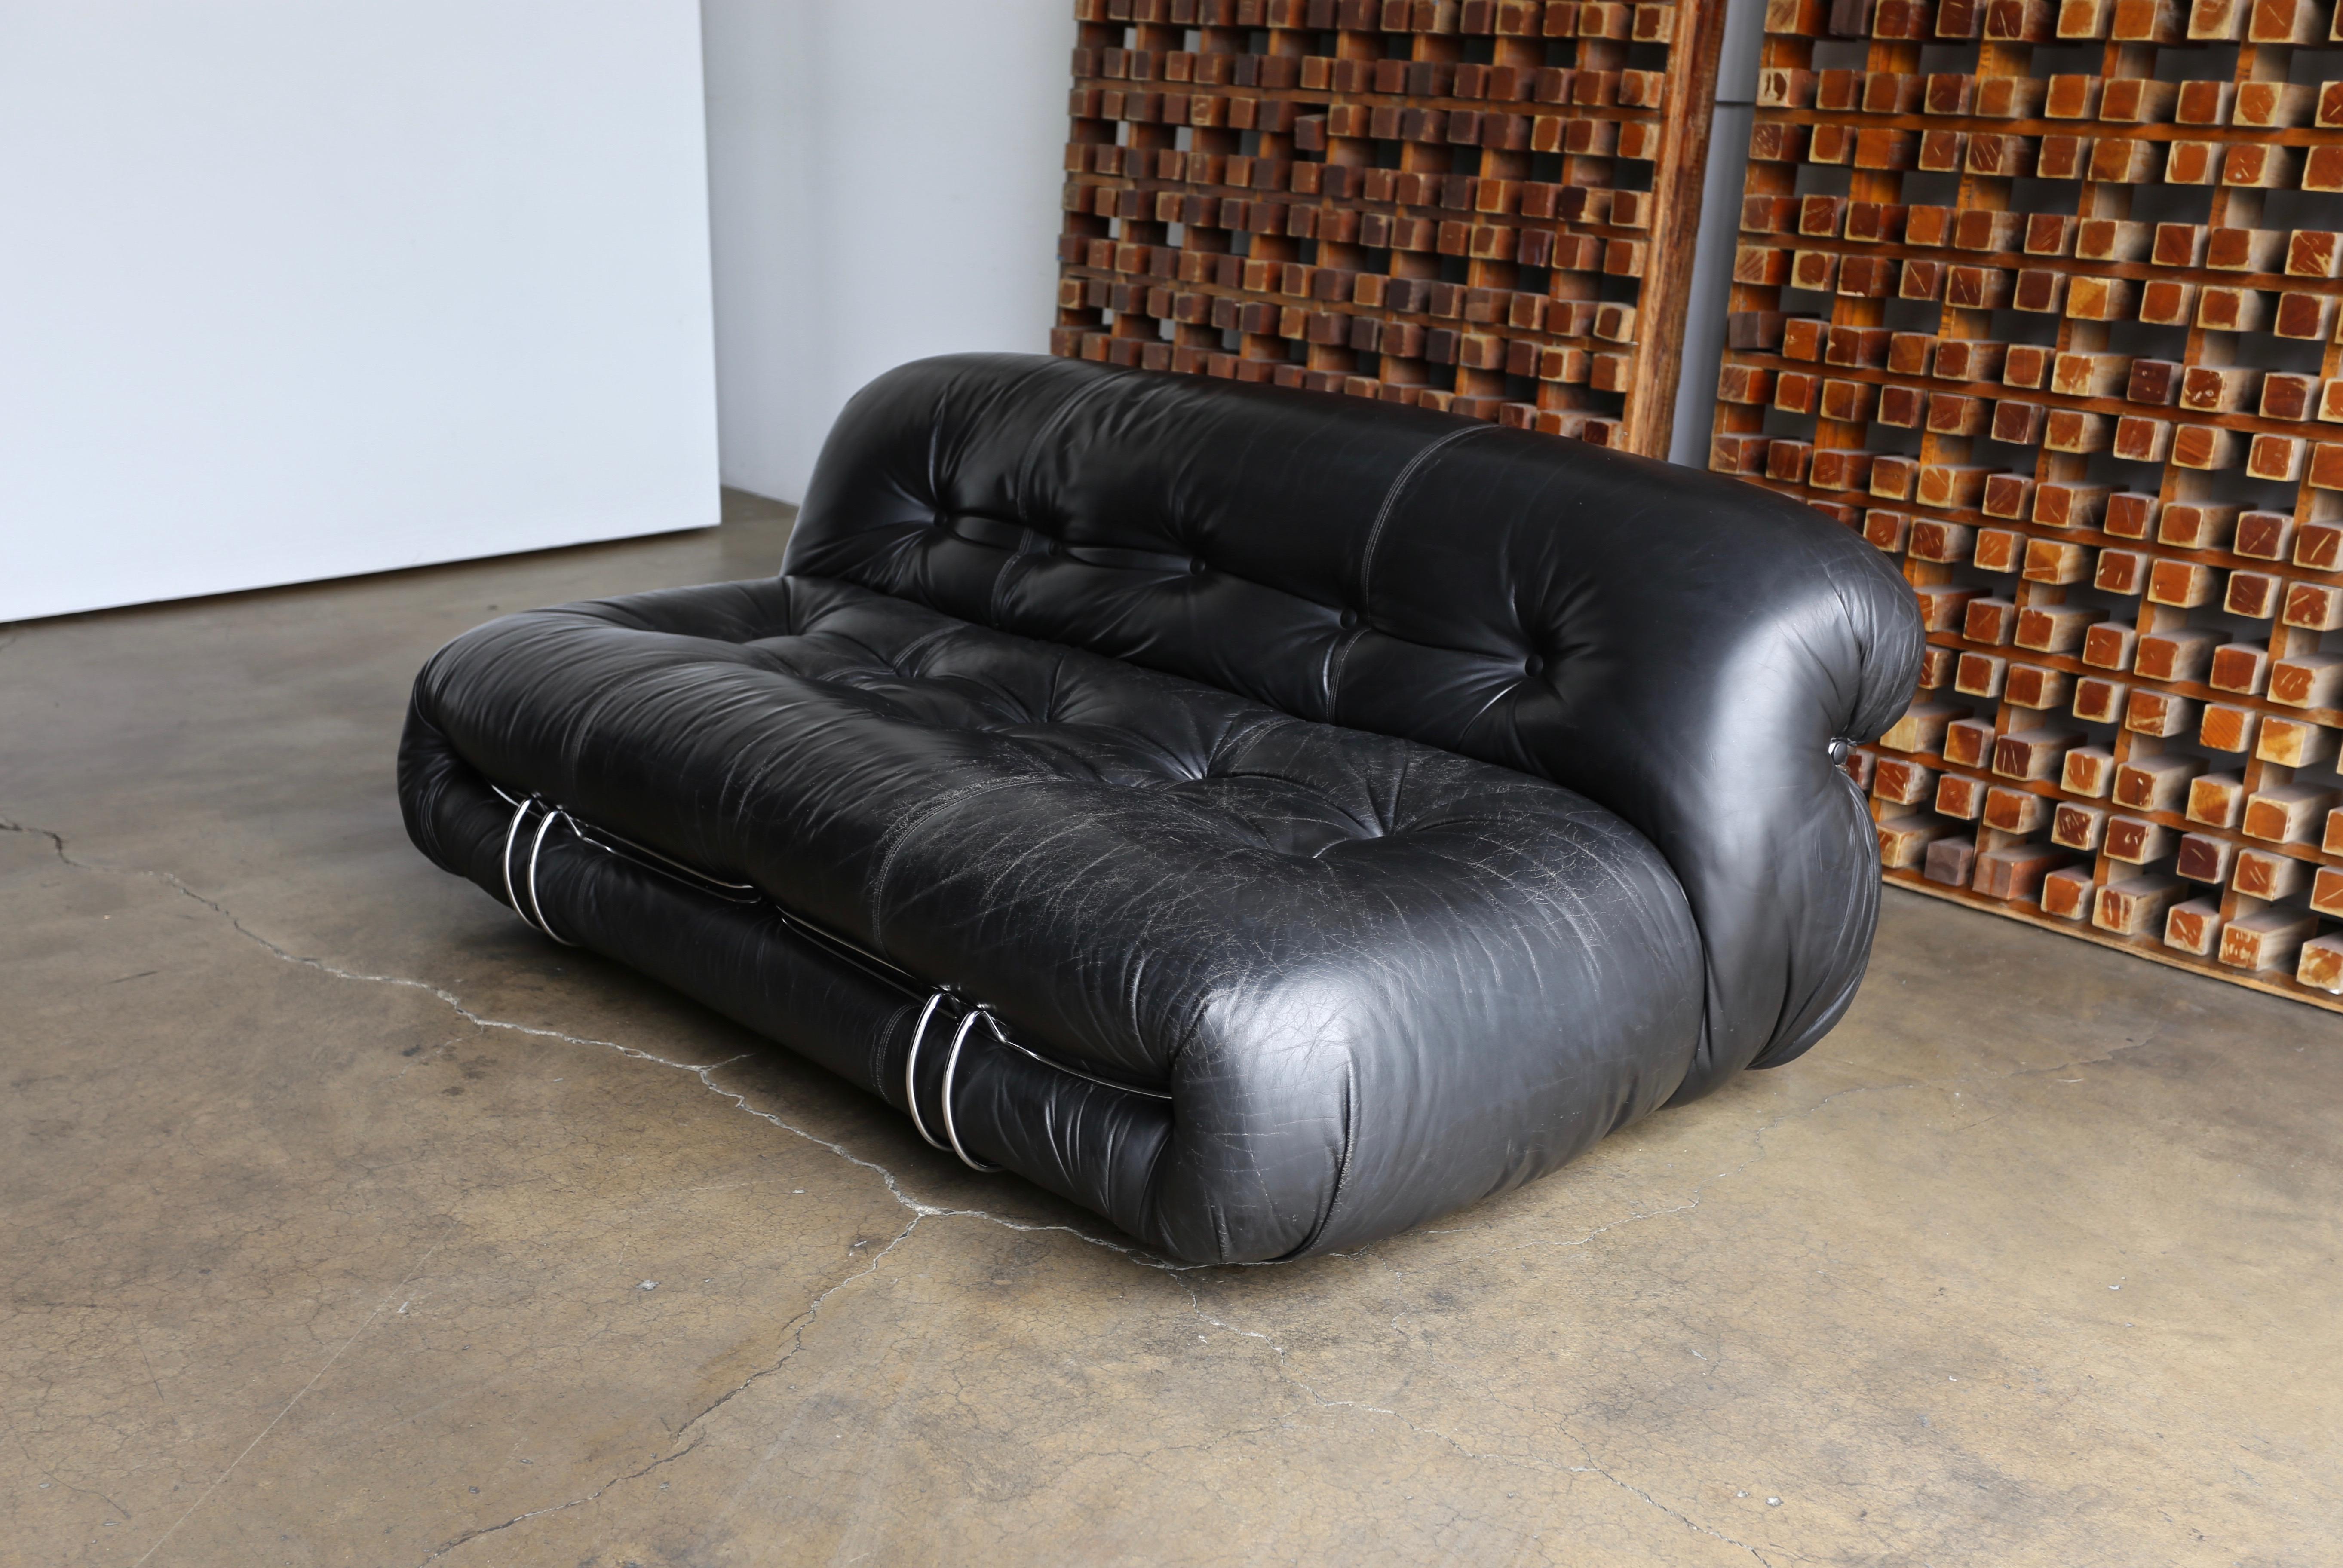 Soriana settee sofa by Afra & Tobia Scarpa for Cassina, circa 1975. Nice patina to the original black leather.